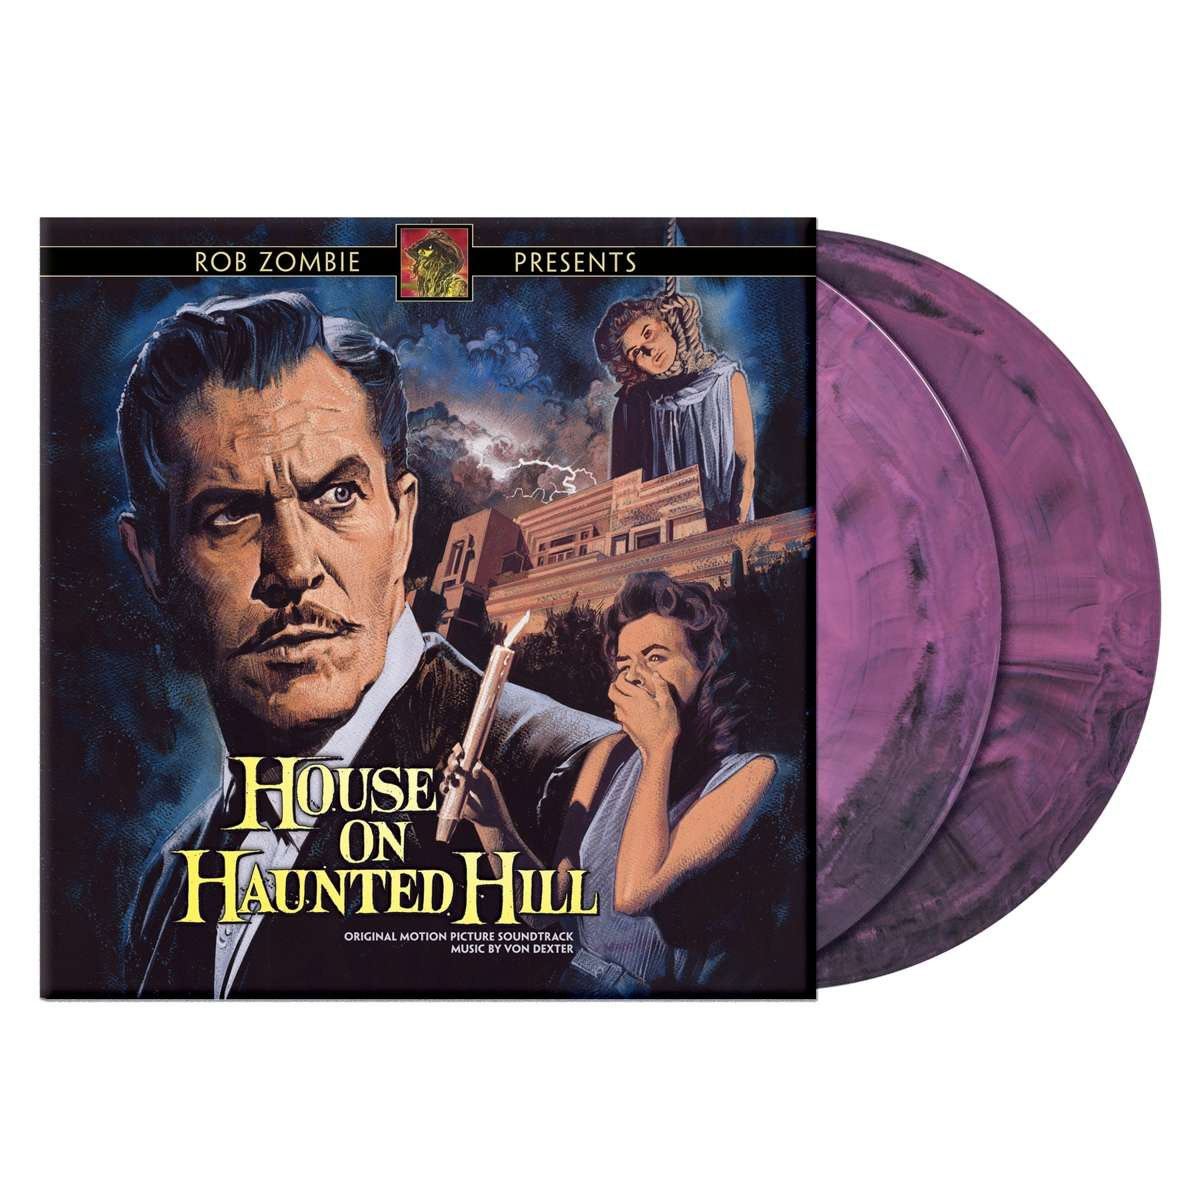 HOUSE ON HAUNTED HILL - PINK VINYL